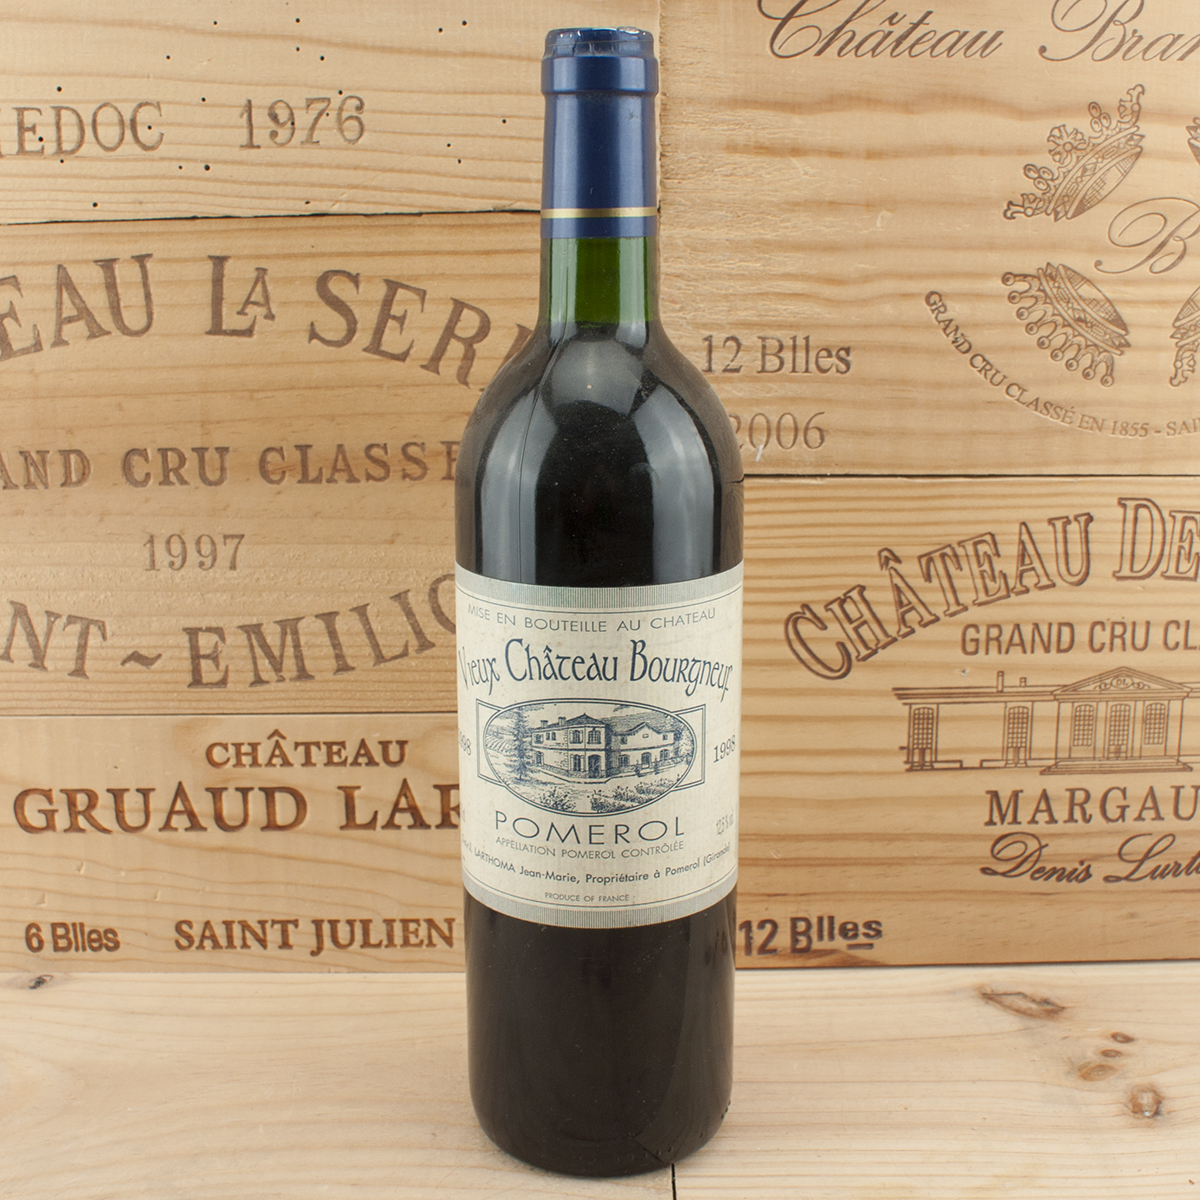 1998 Vieux Chateau Bourgneuf